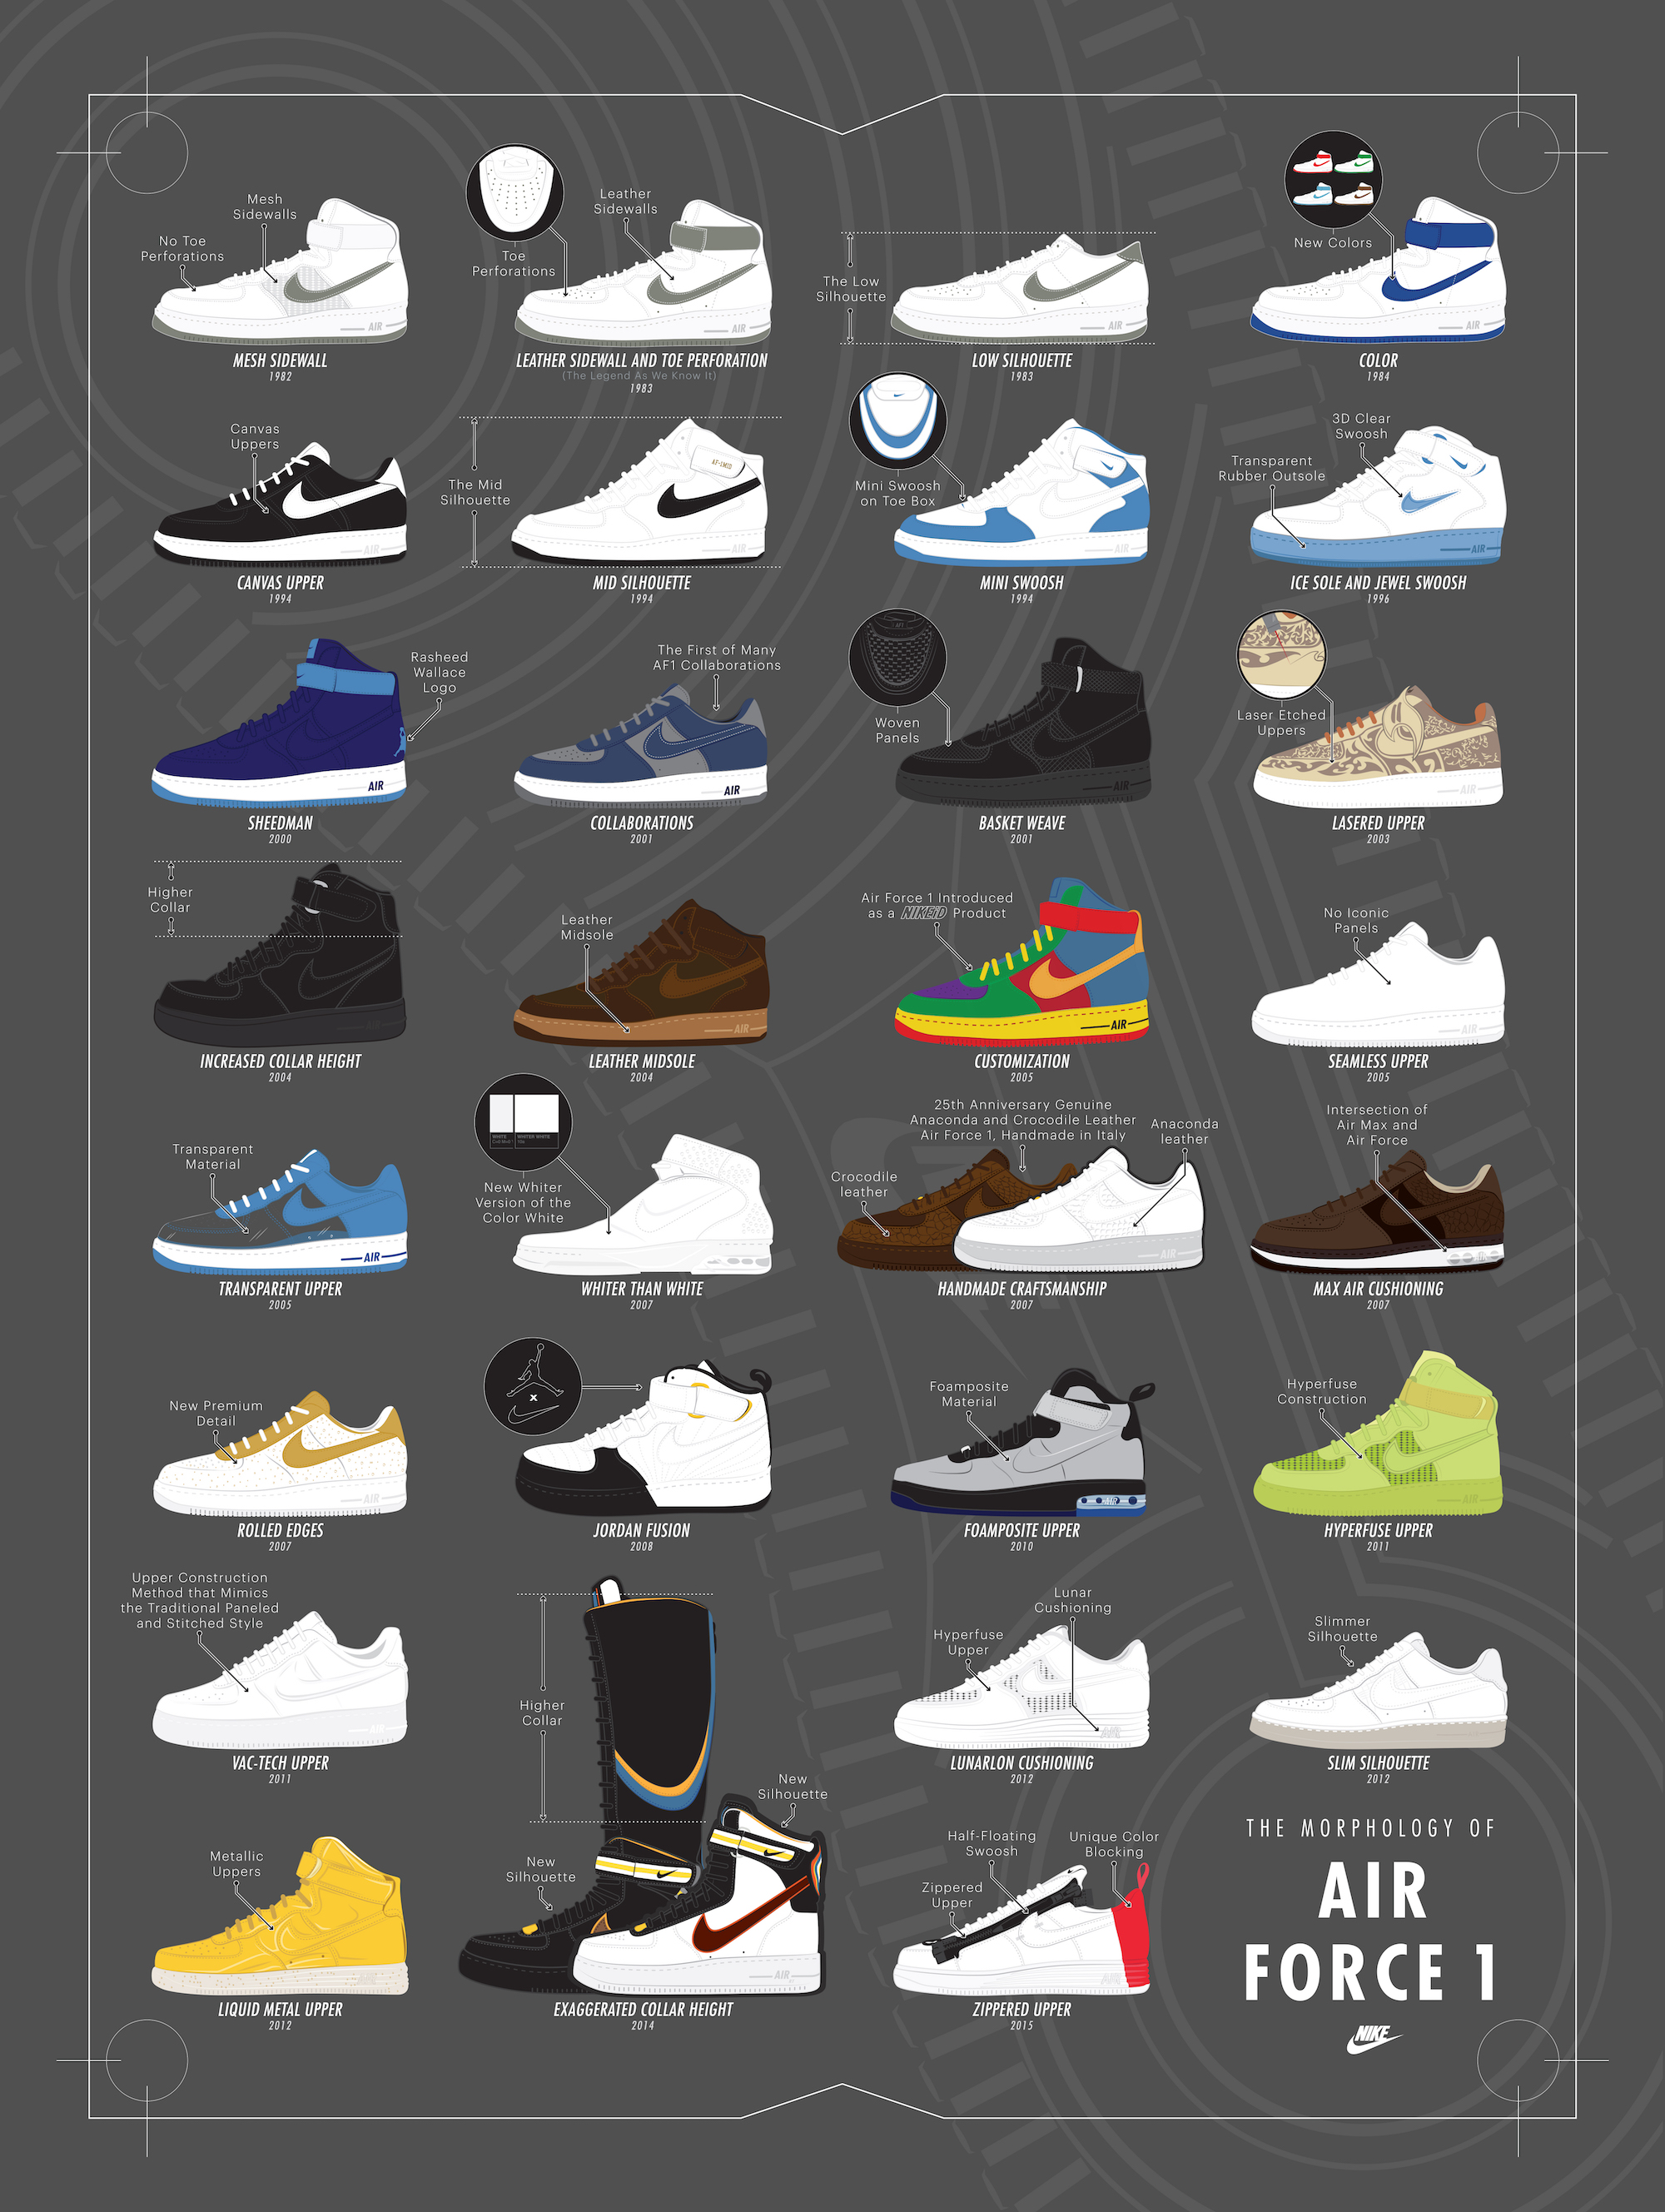 Sneaker Life: Time Brings Change: The Morphology Of Air